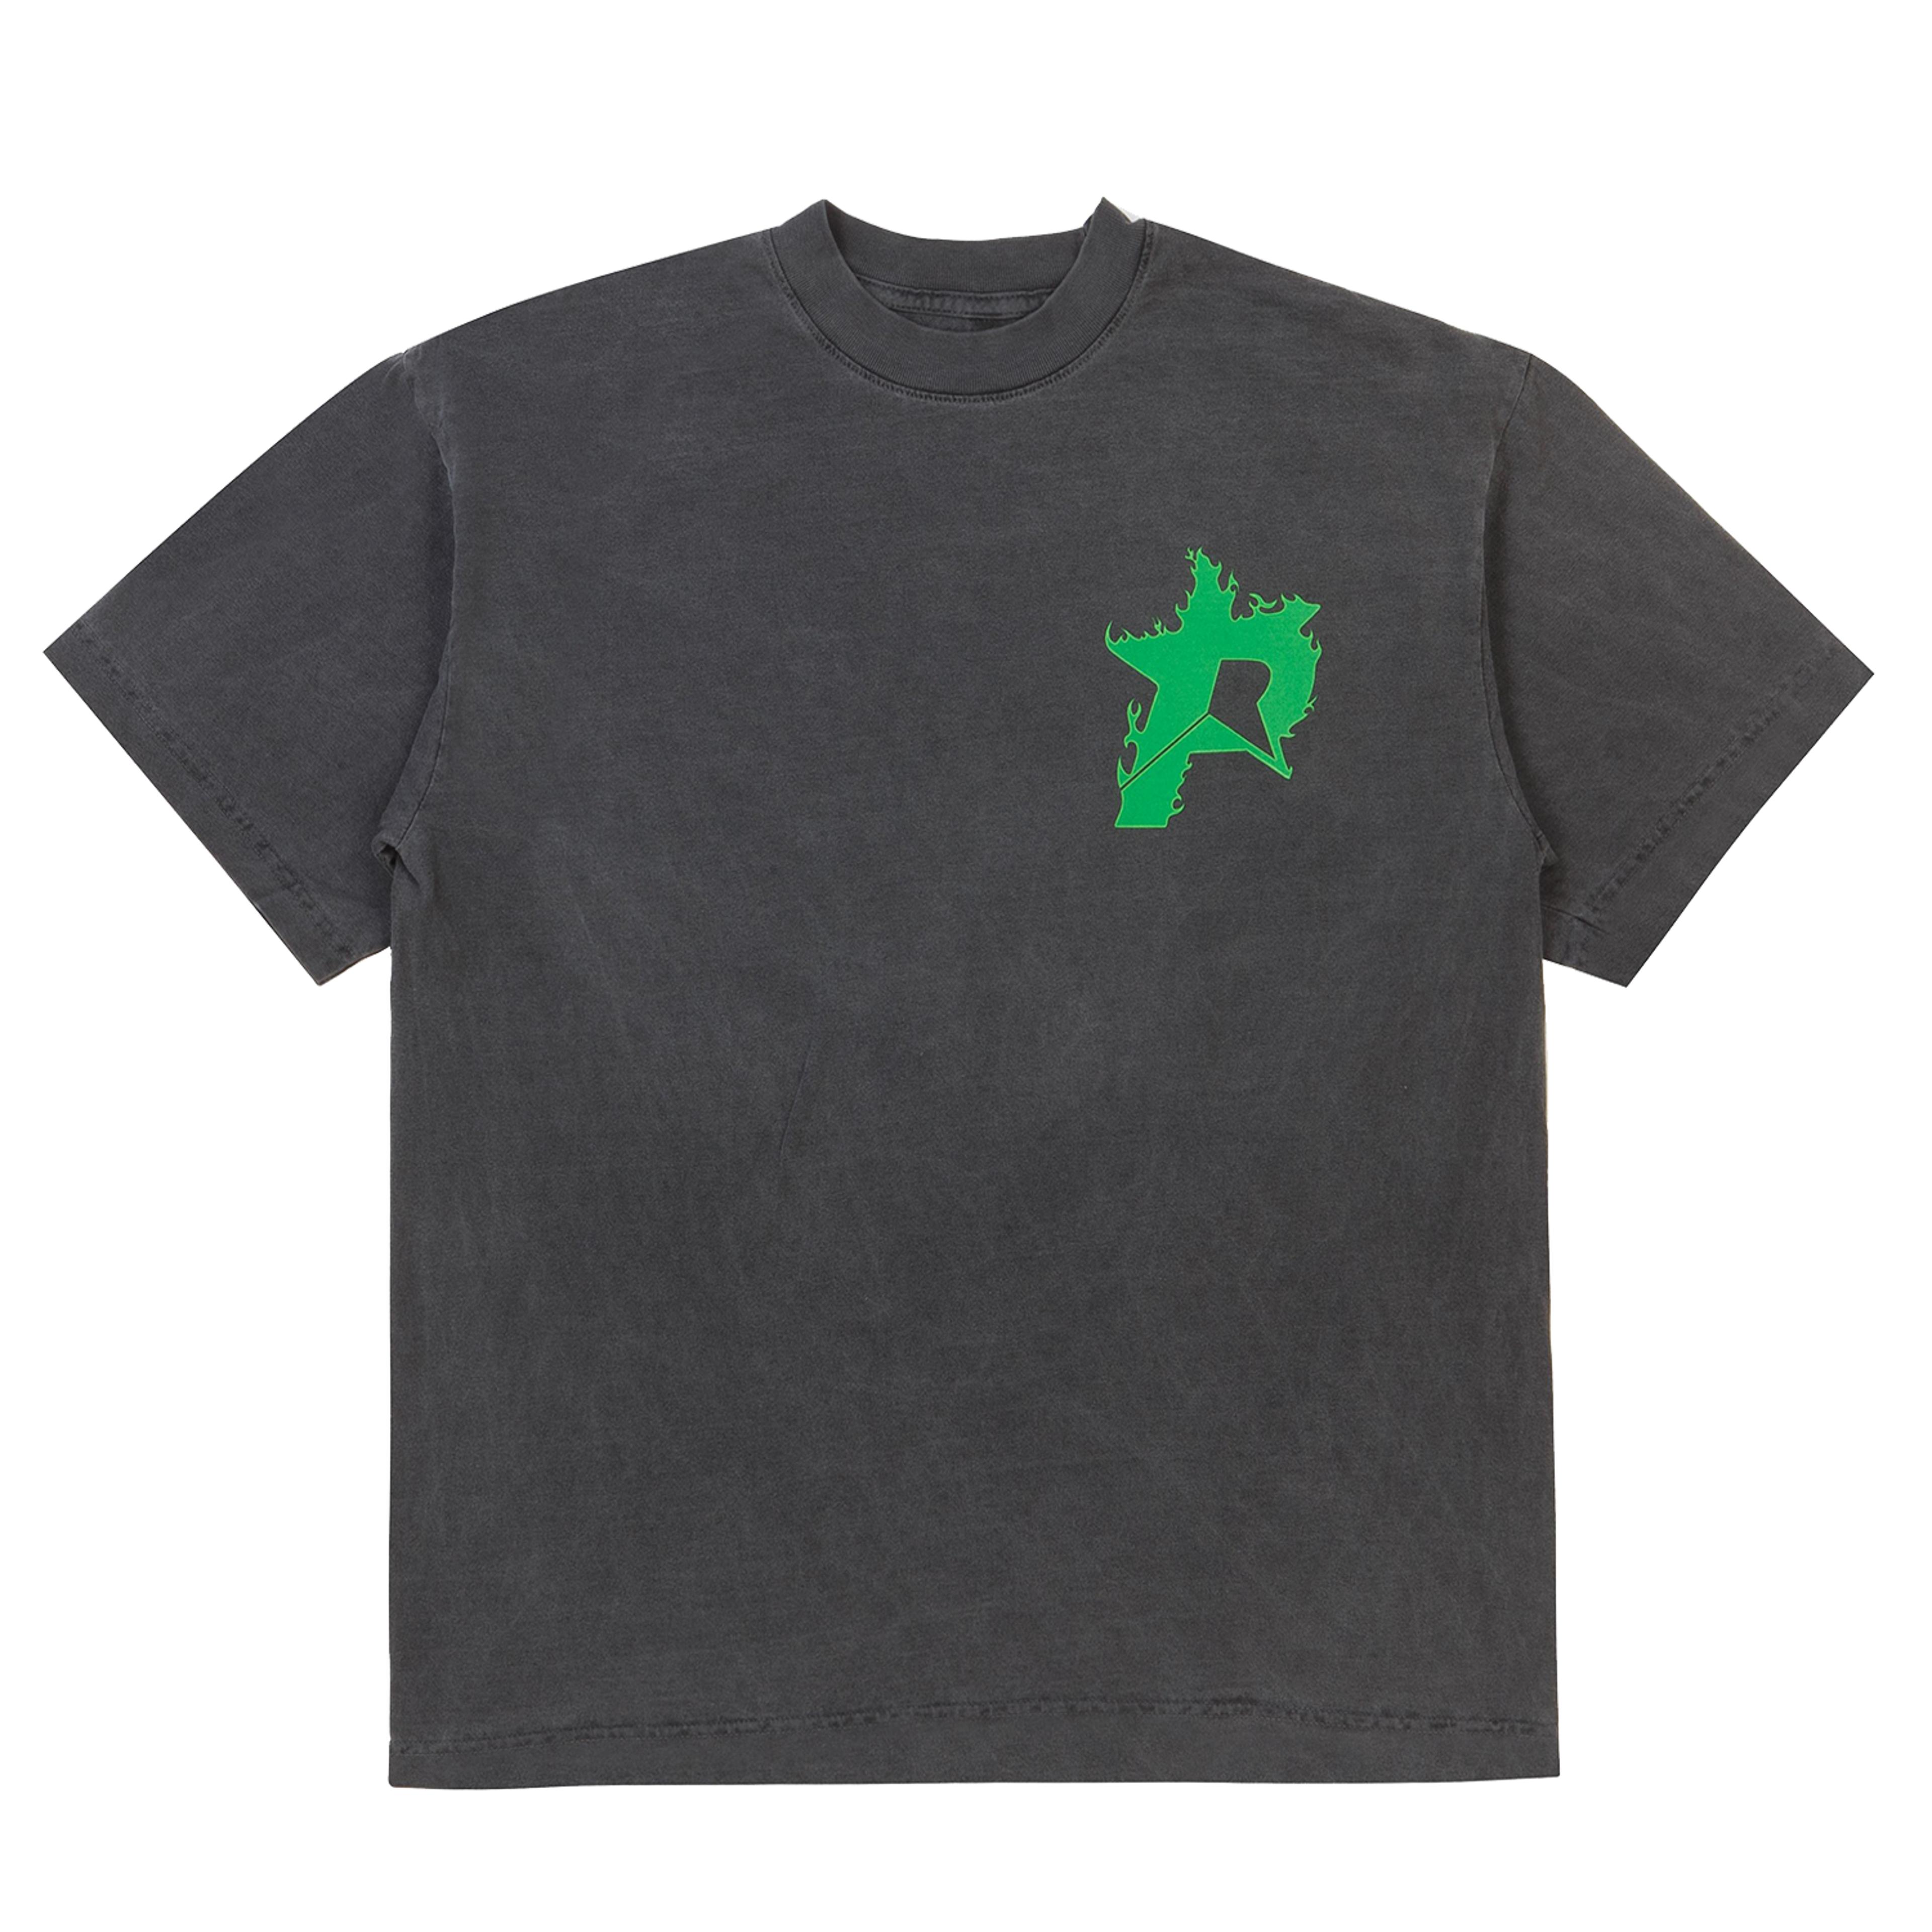 Alternate View 1 of Pieces P Star Flames Tee Washed Black Green